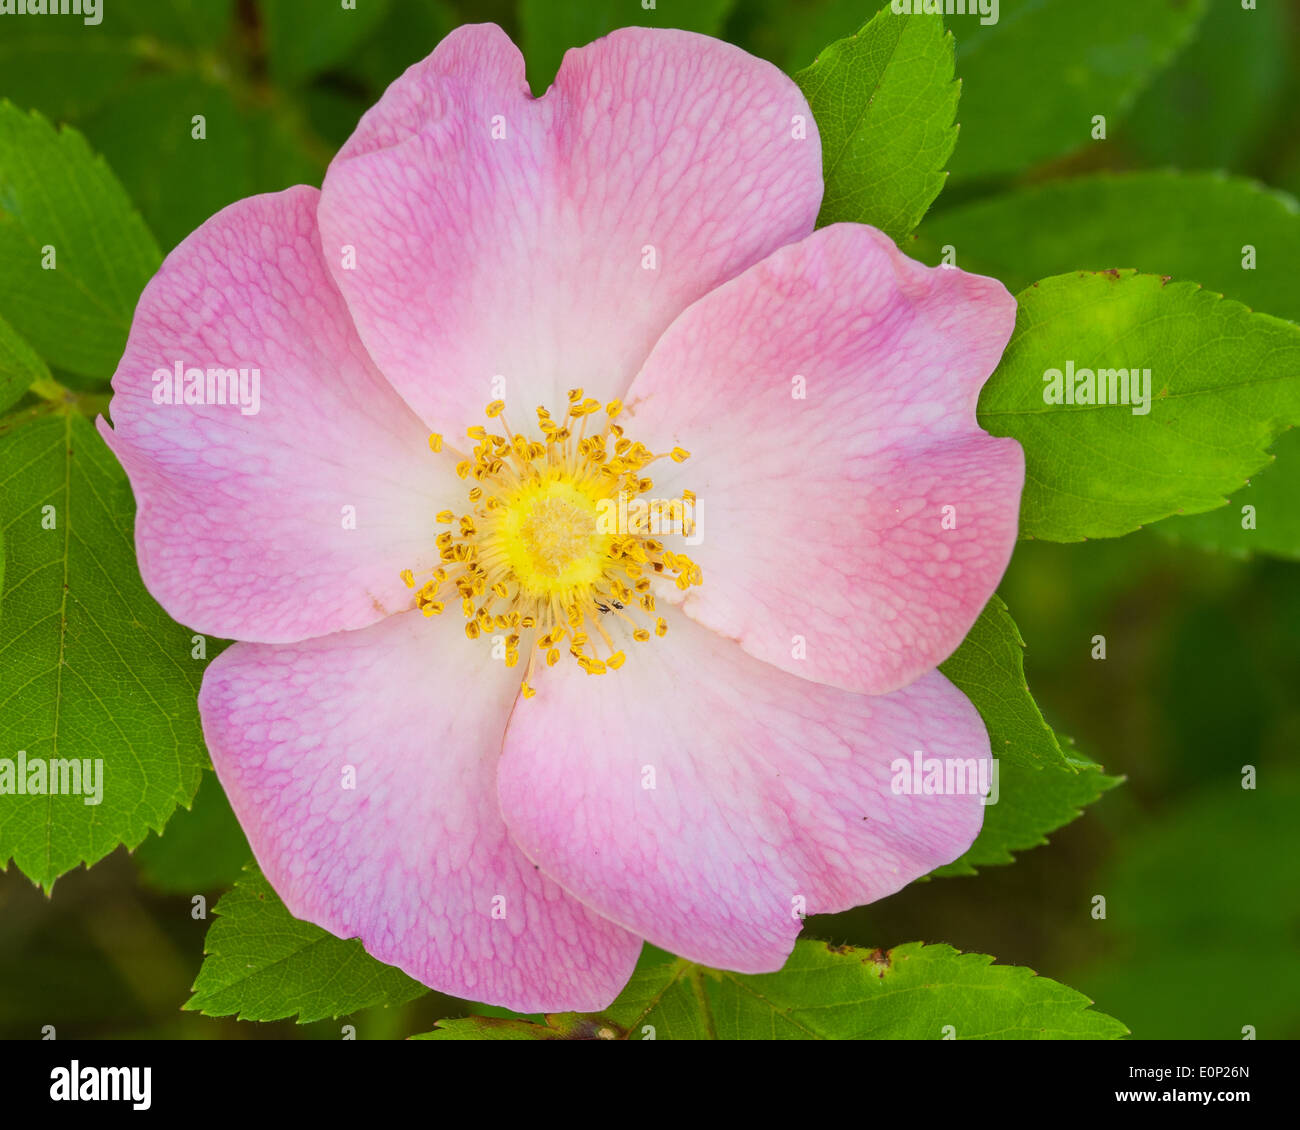 The pink and yellow flower of a pasture rose (Rosa carolina) in full bloom. Stock Photo